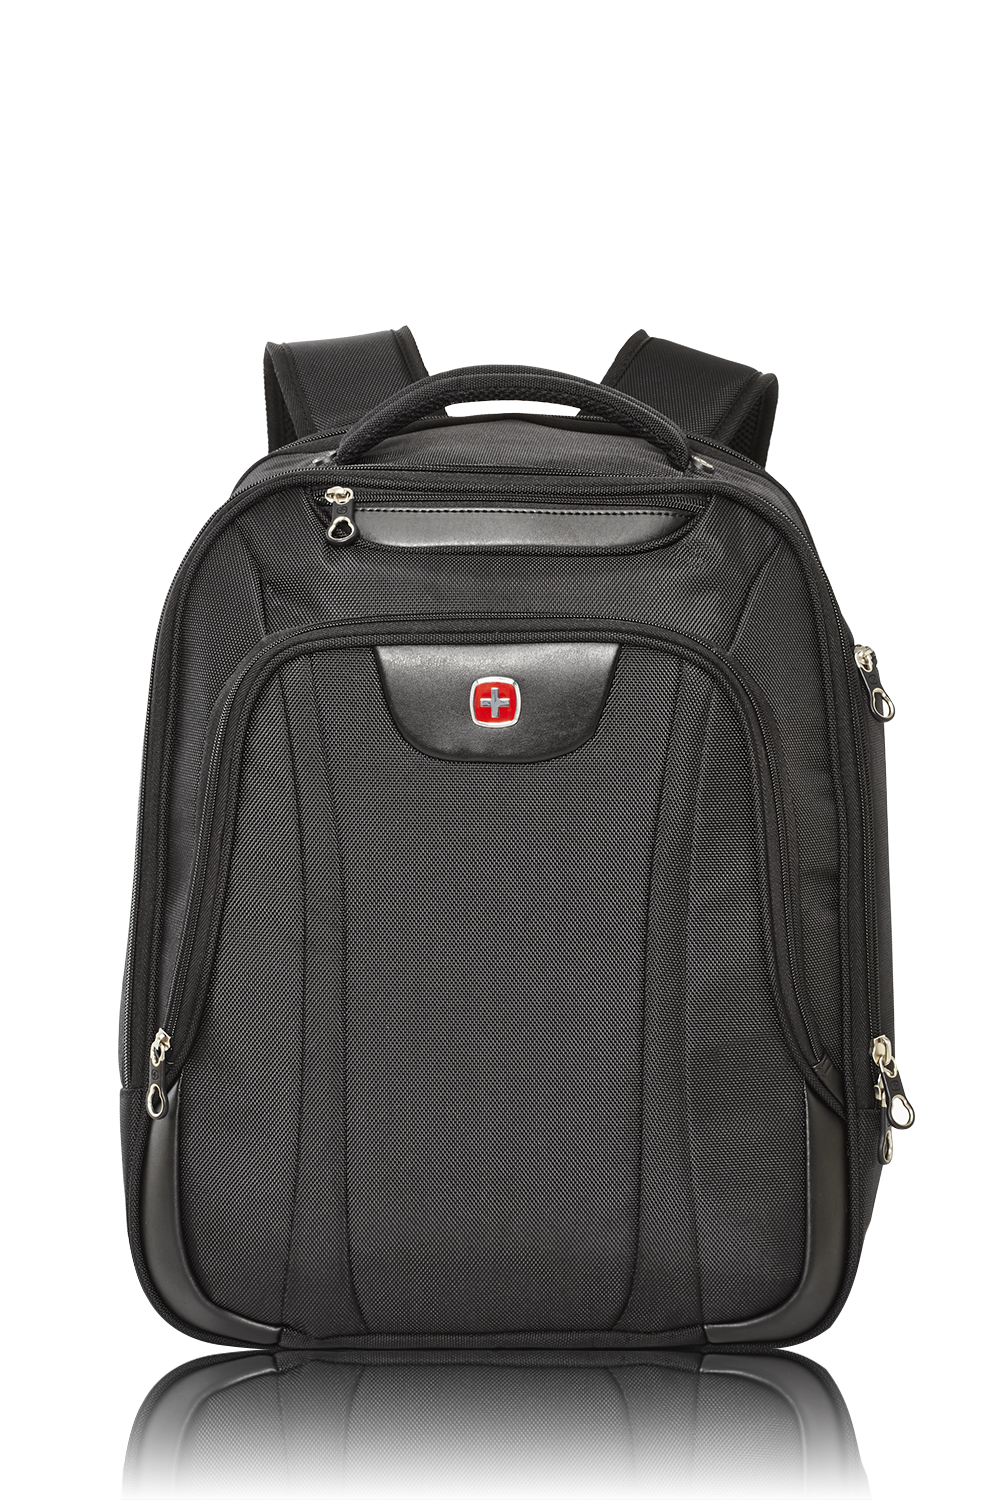 The Best Laptop Bags For Your Return To The Office - Chatelaine